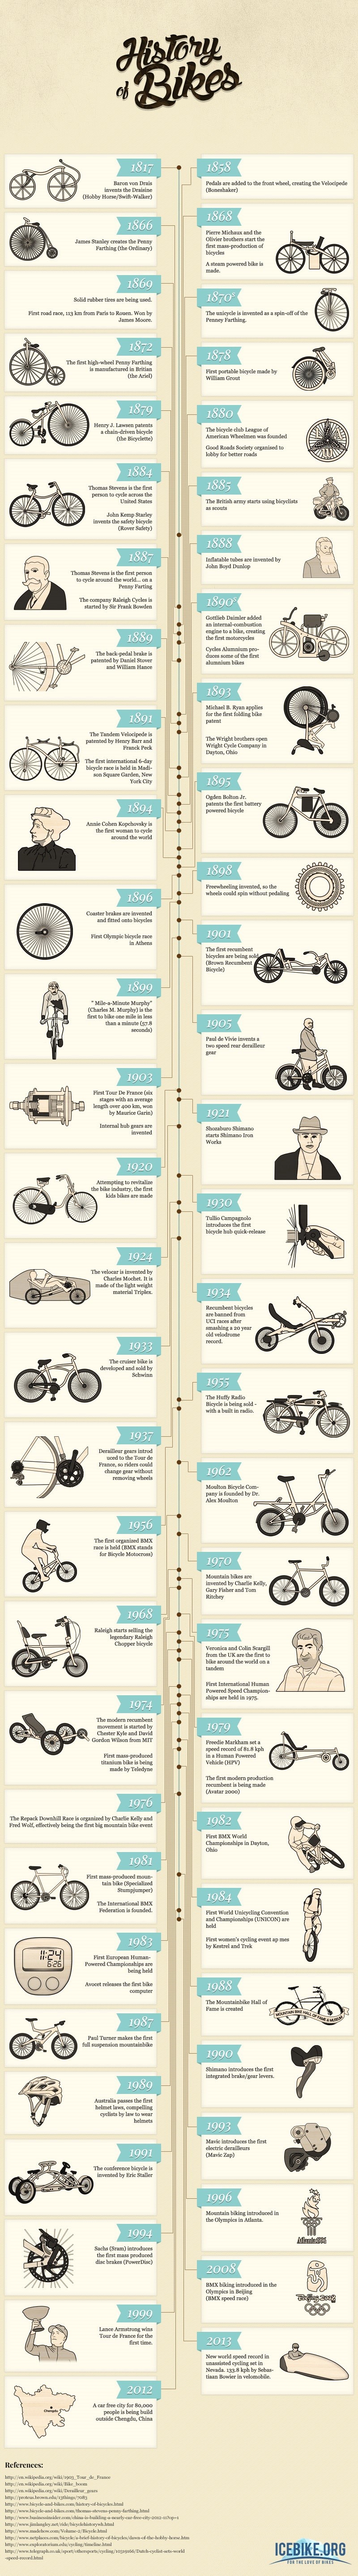 Bicycle history timeline